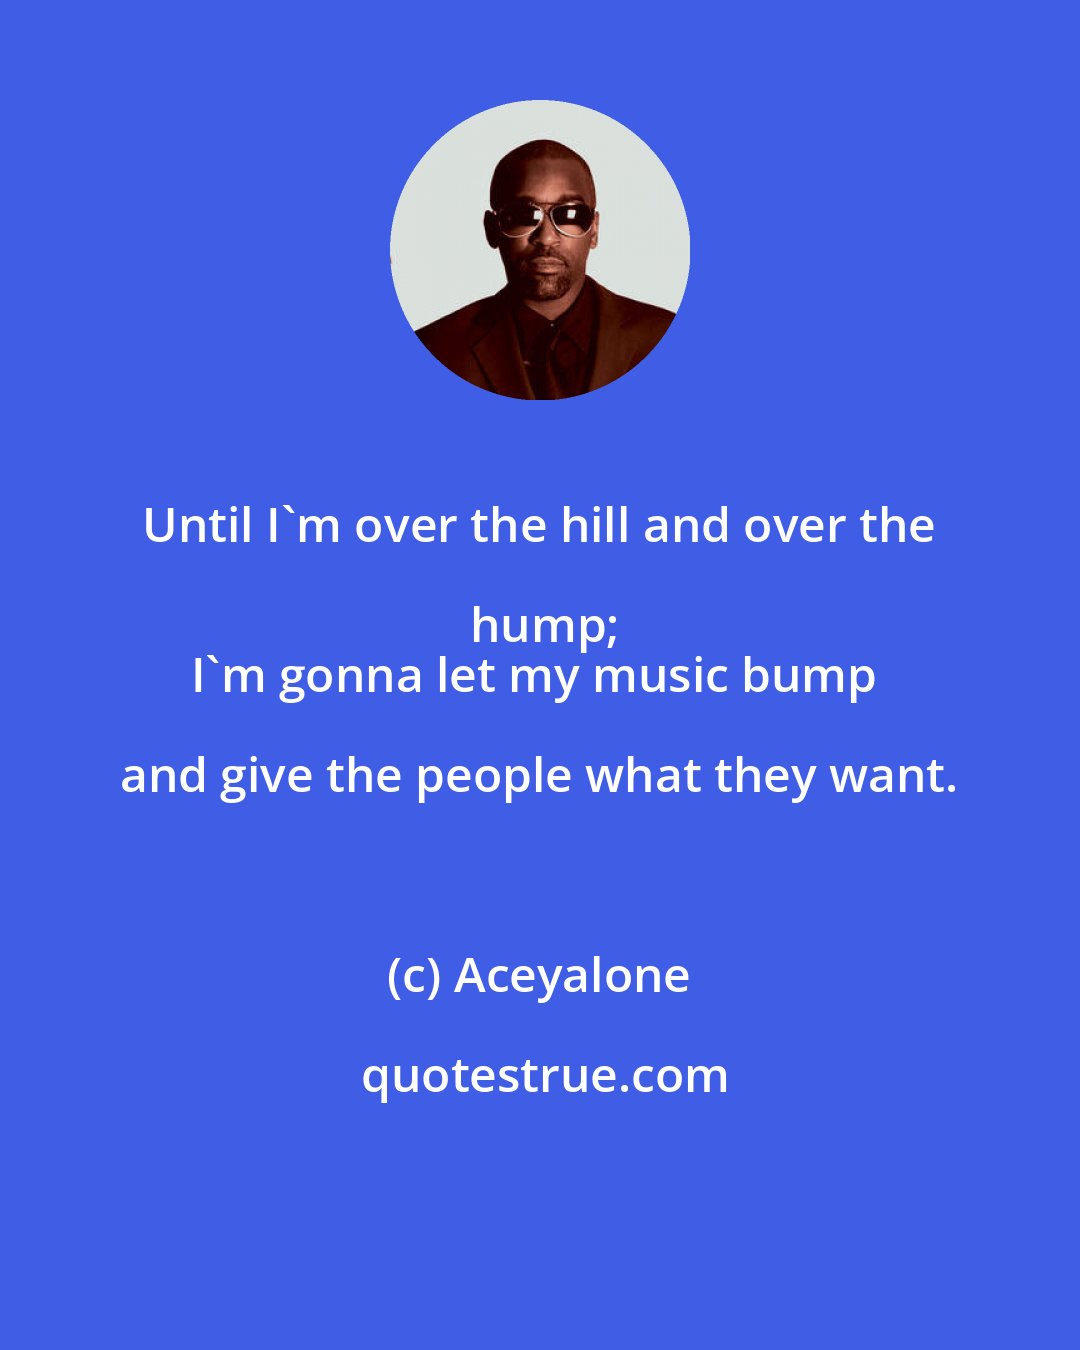 Aceyalone: Until I'm over the hill and over the hump;
I'm gonna let my music bump and give the people what they want.